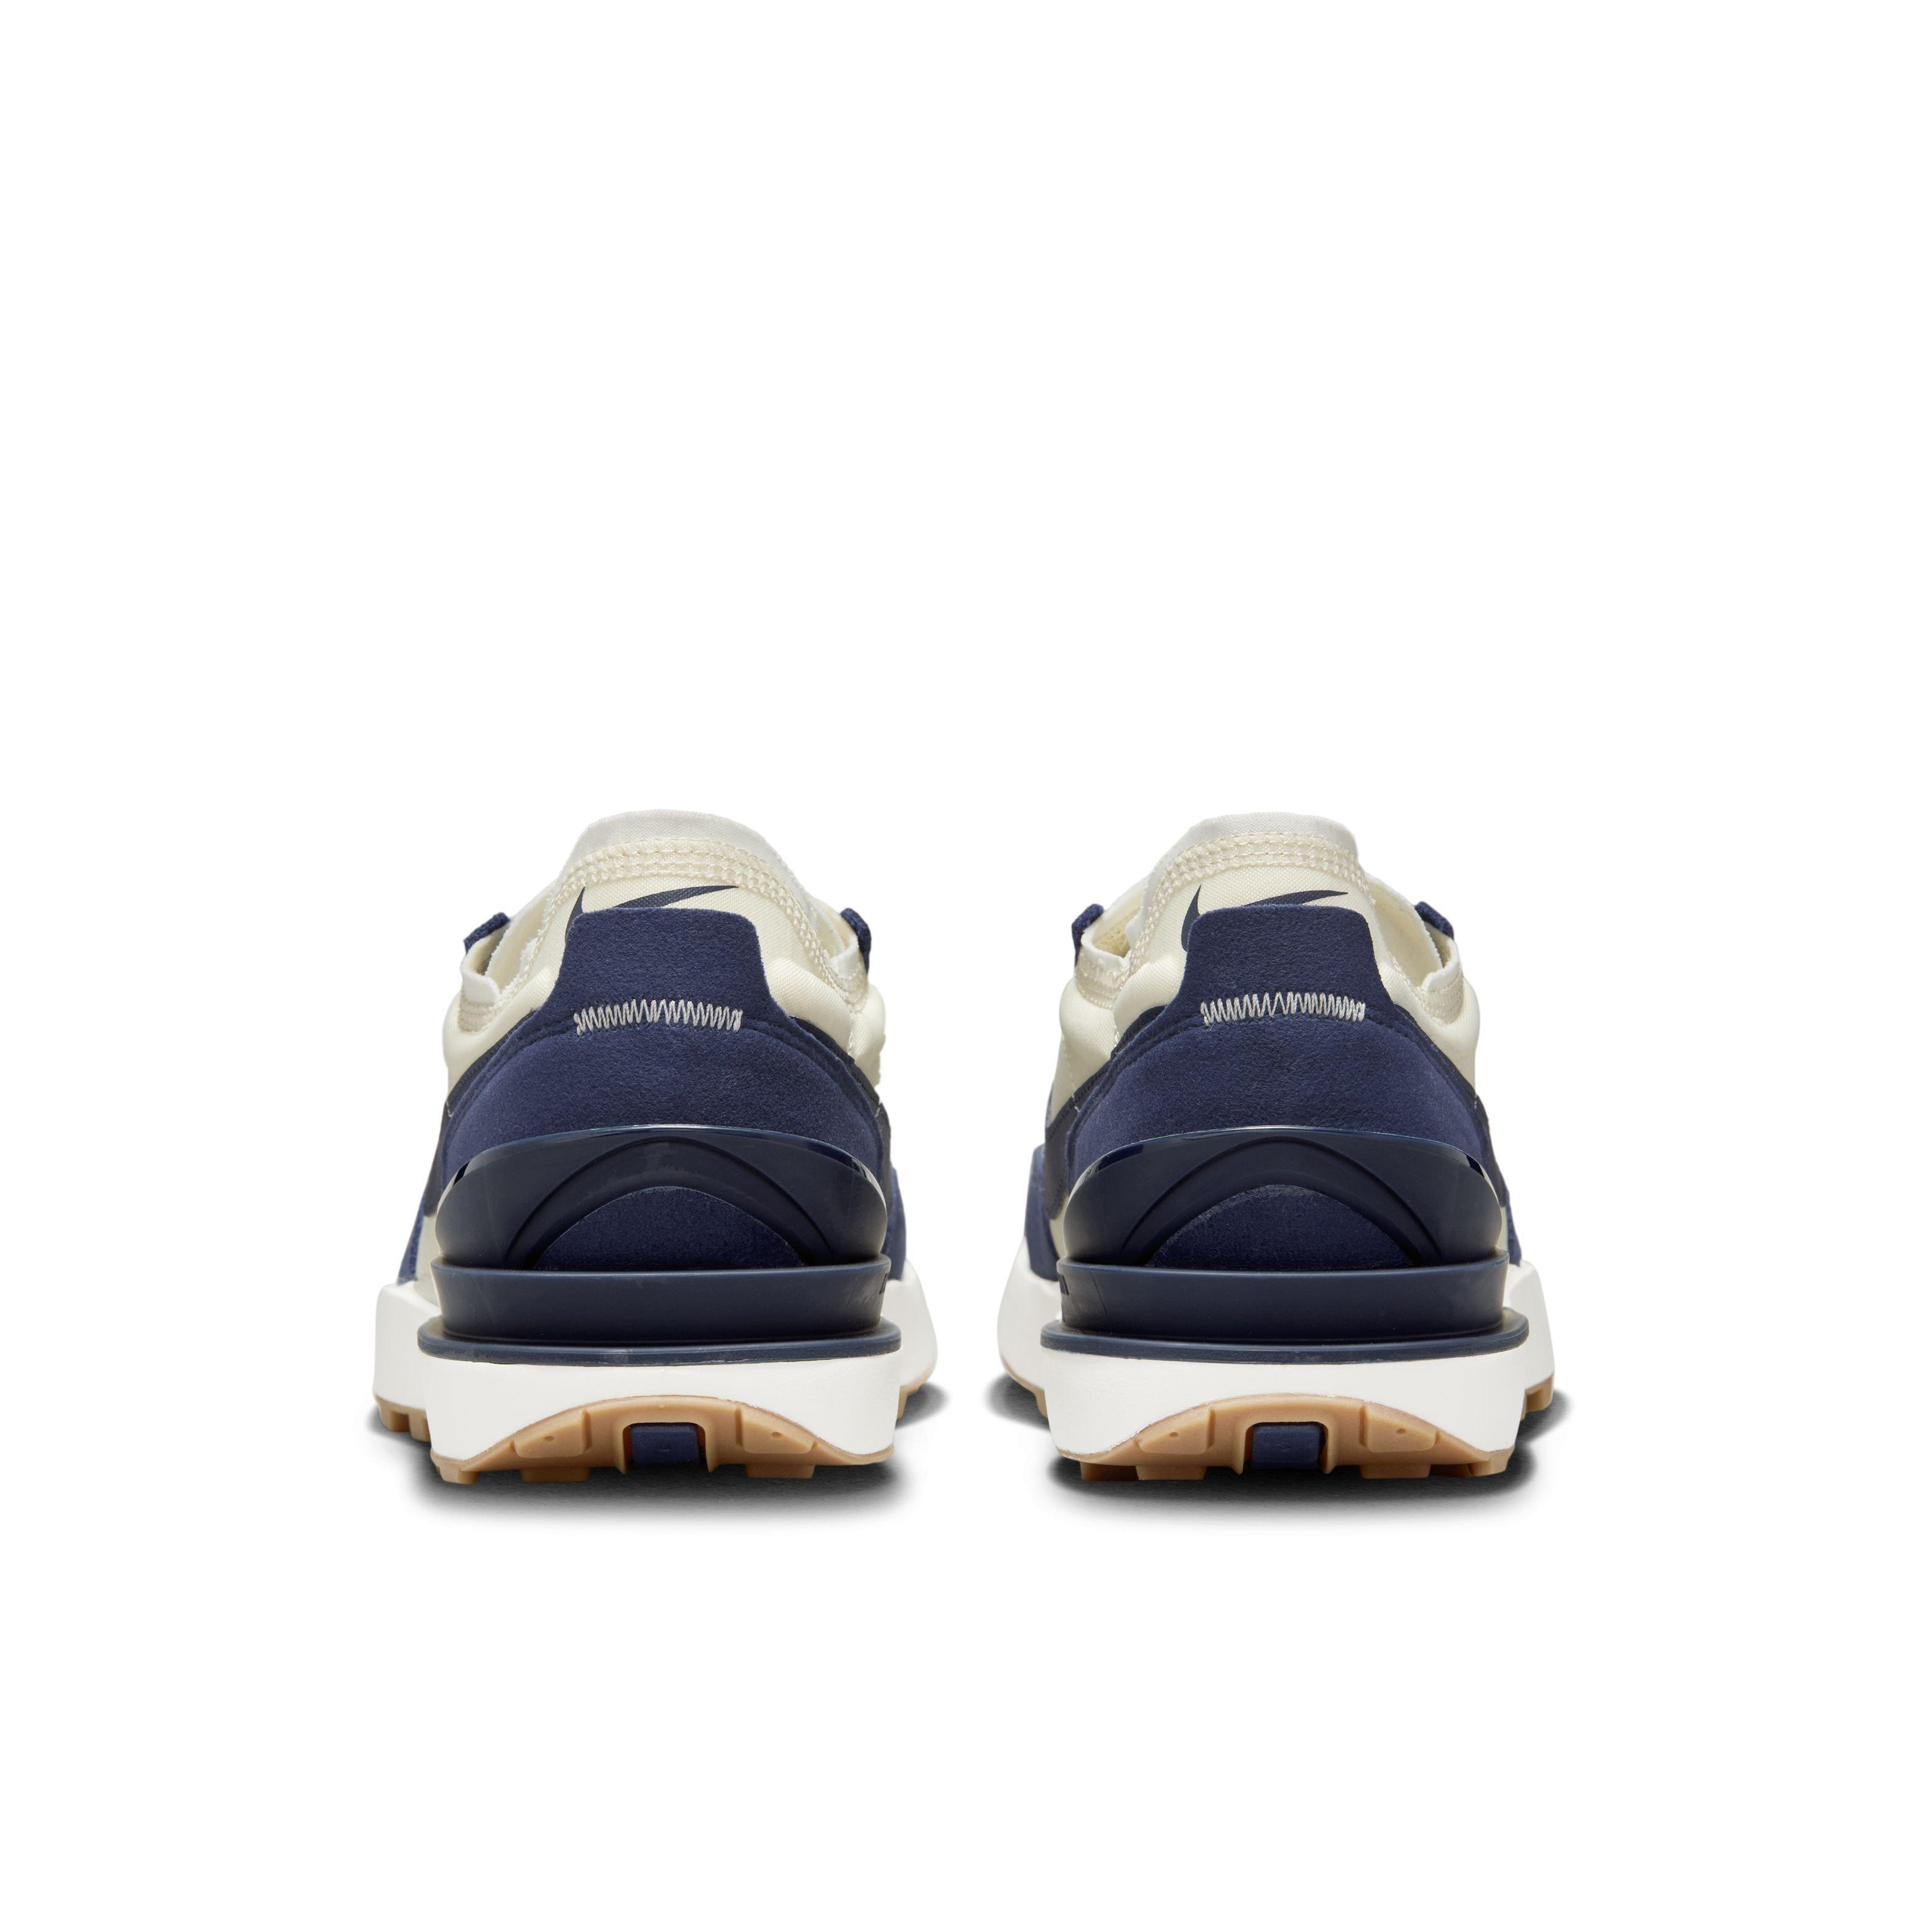 Nike Waffle One SE Sneakers in Stone and Navy-White